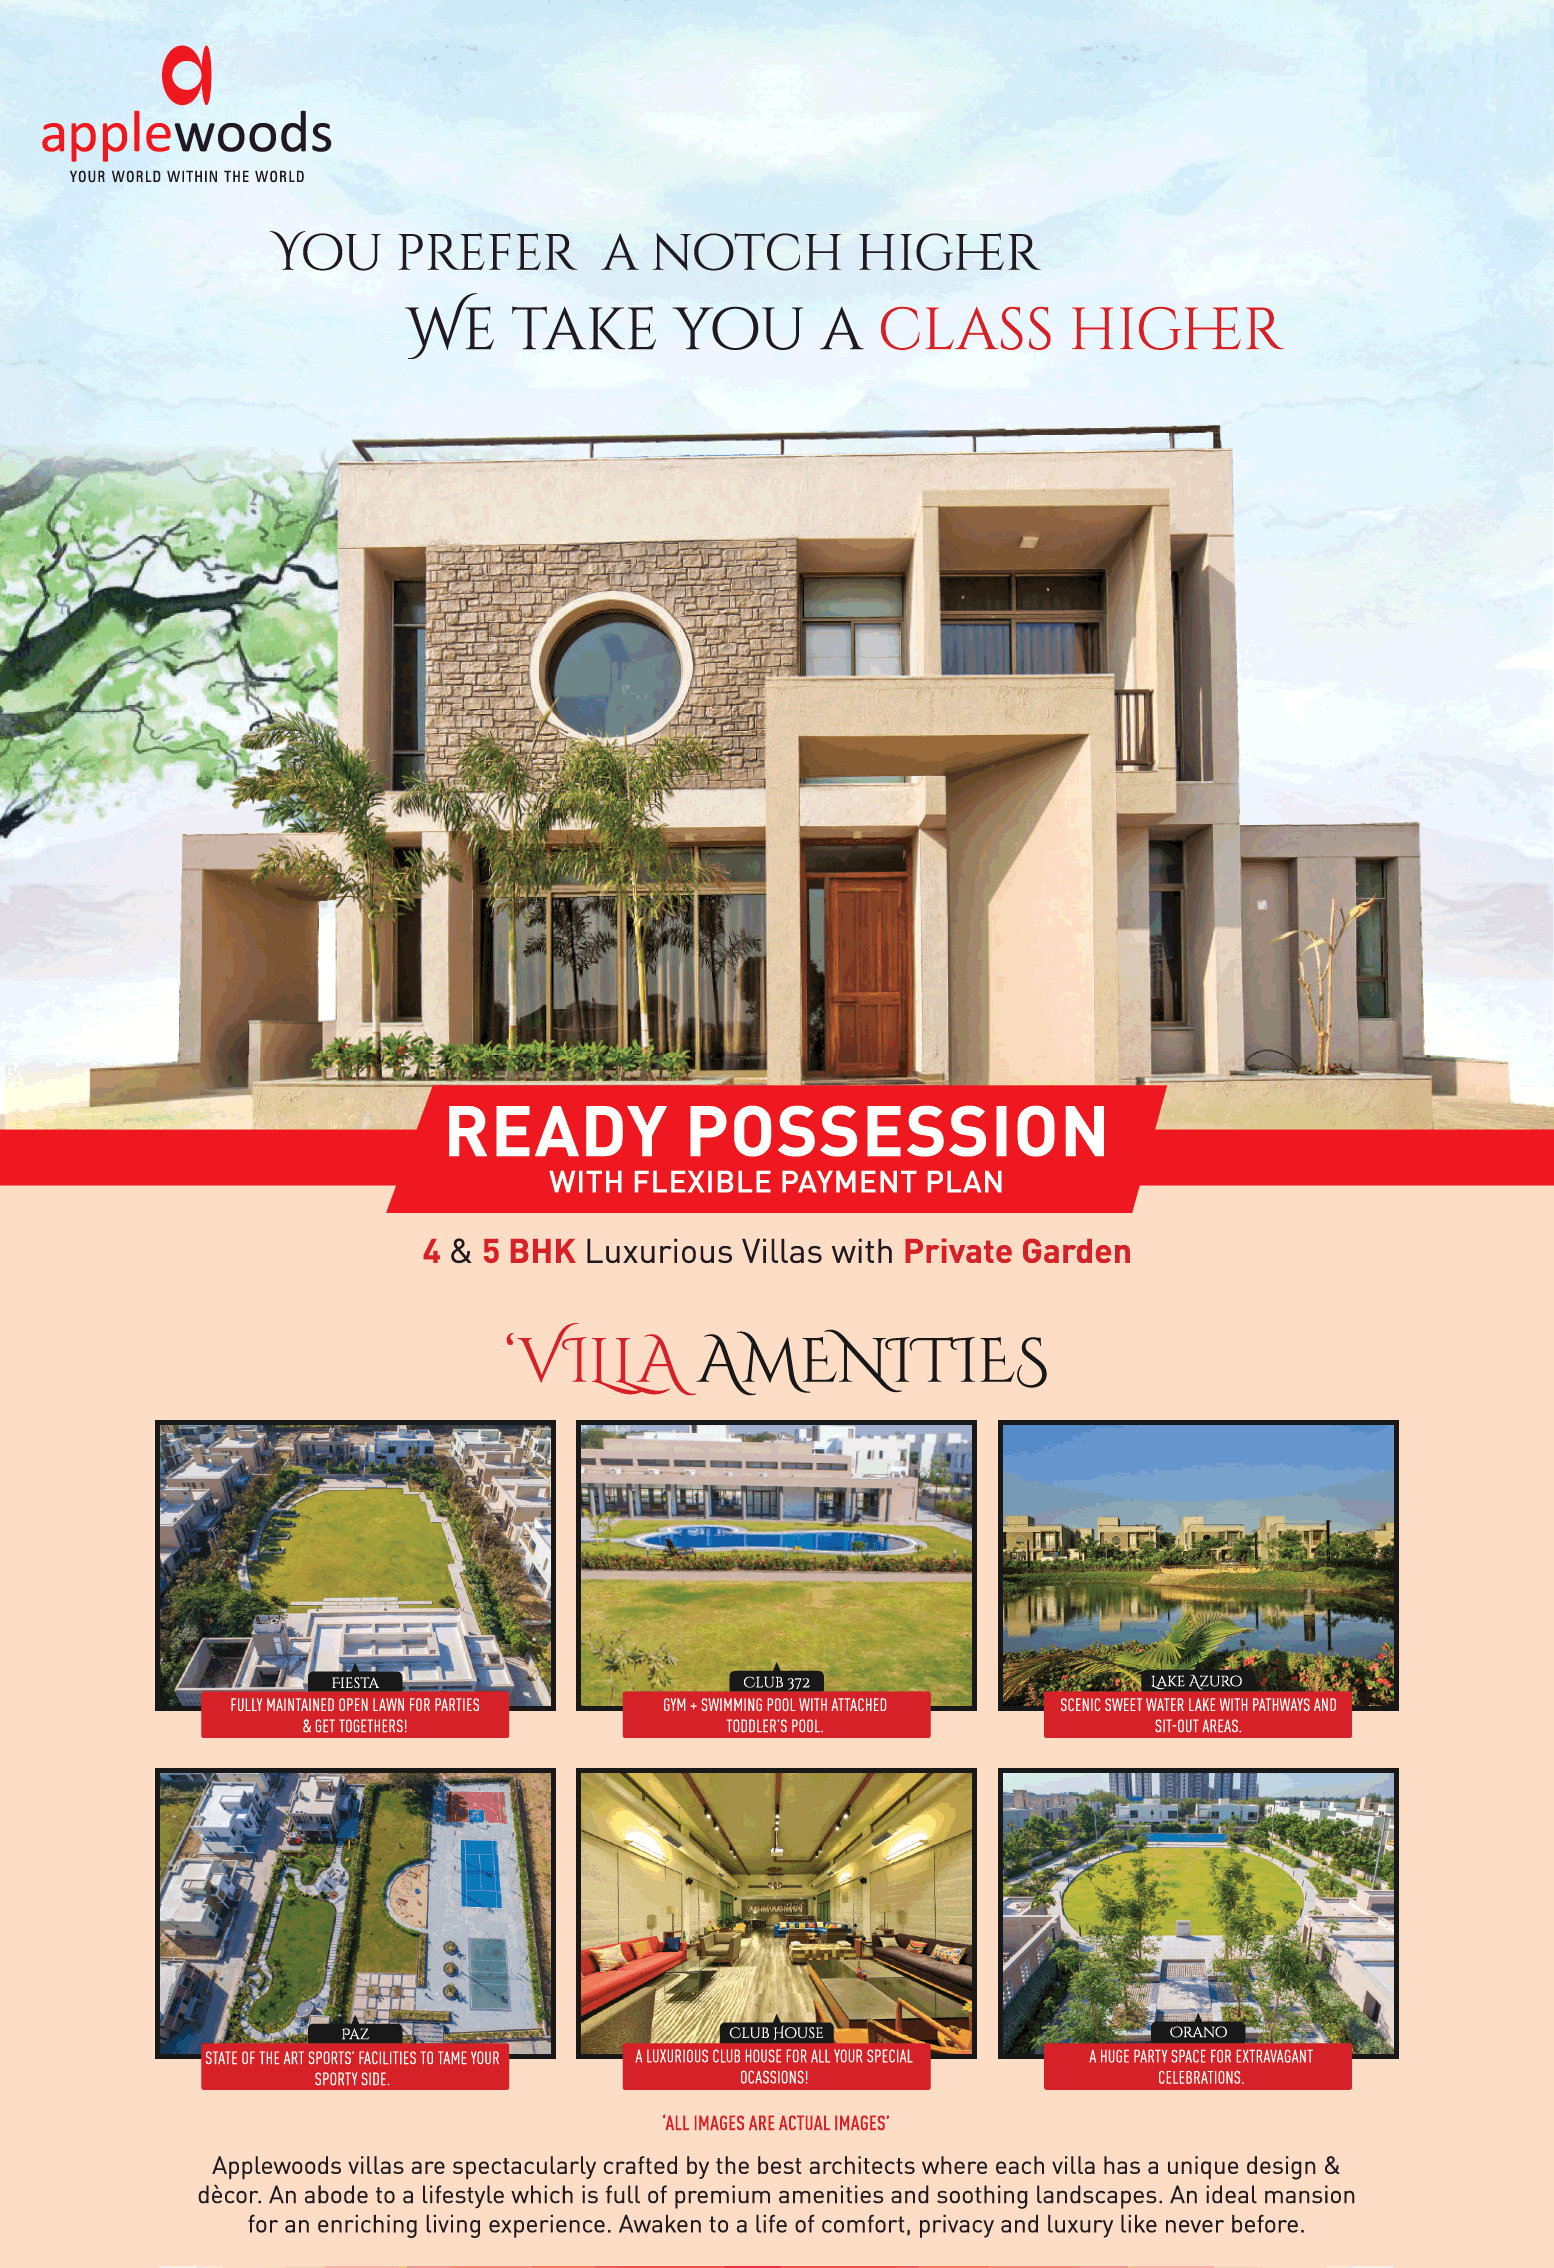 Ready possession with a flexible payment plan at Applewood Sorrel in Ahmedabad